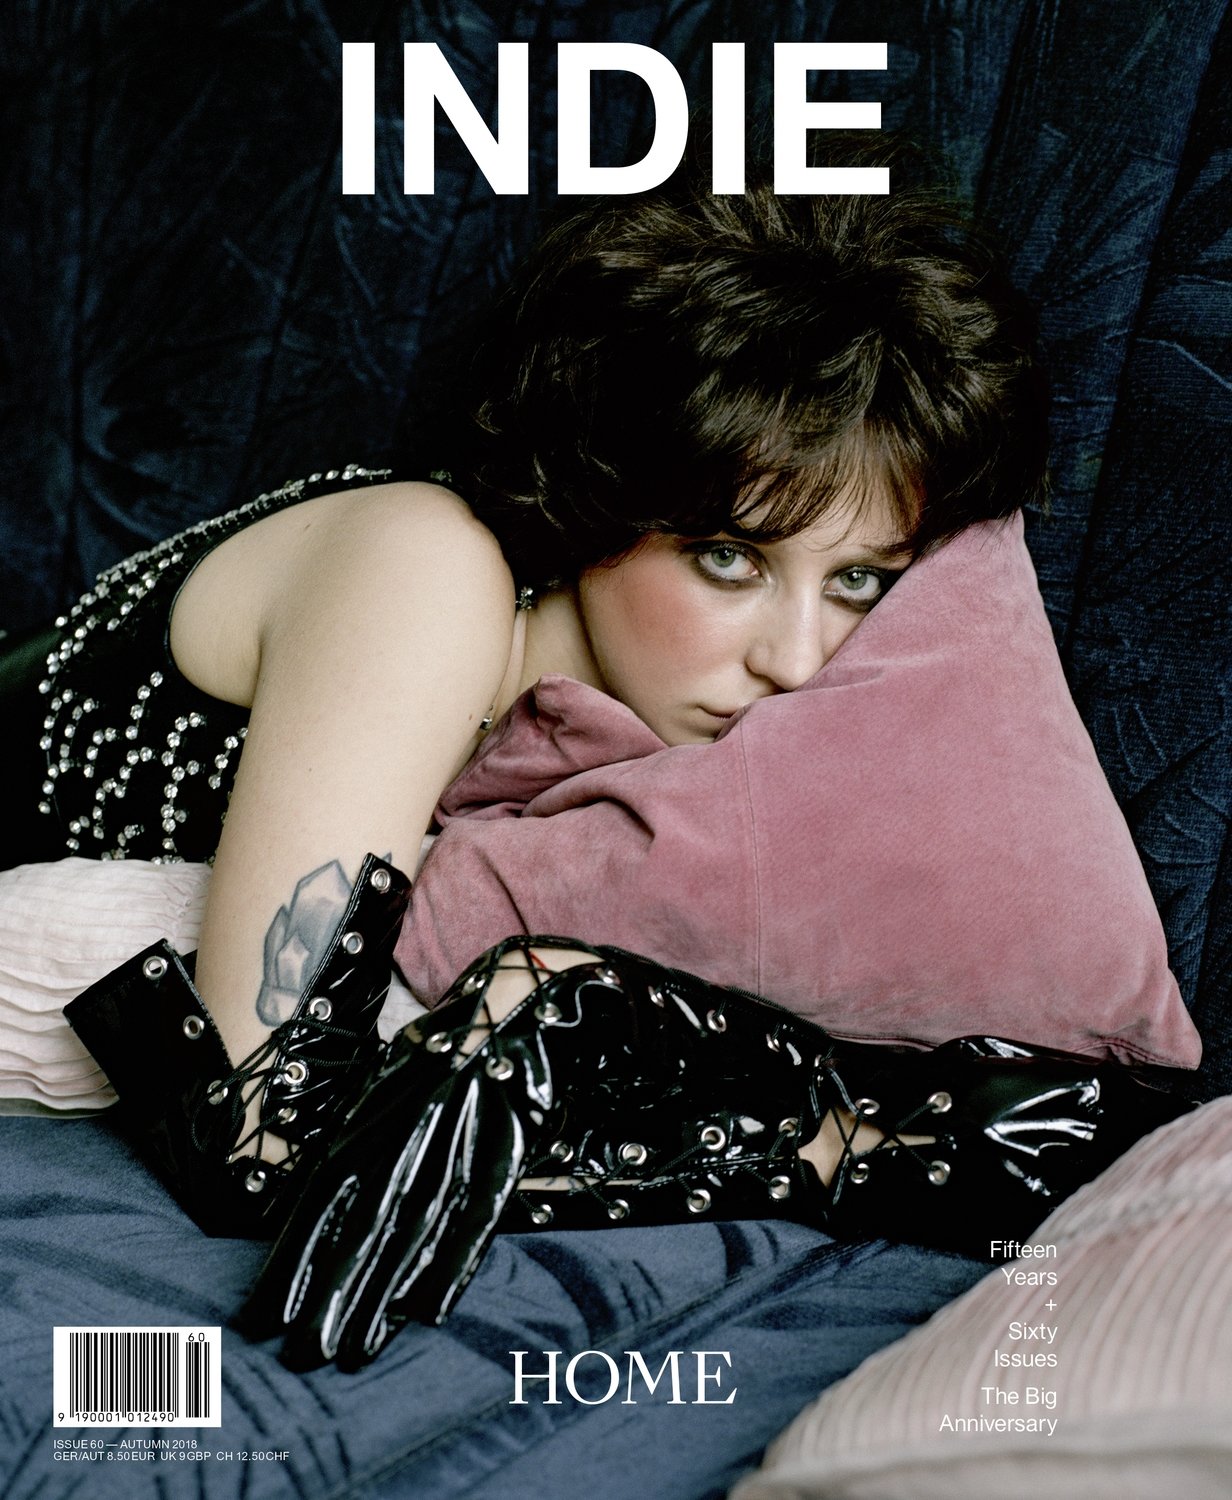 INDIE #60 - The Big 15 Years Anniversary Issue - Cover 3